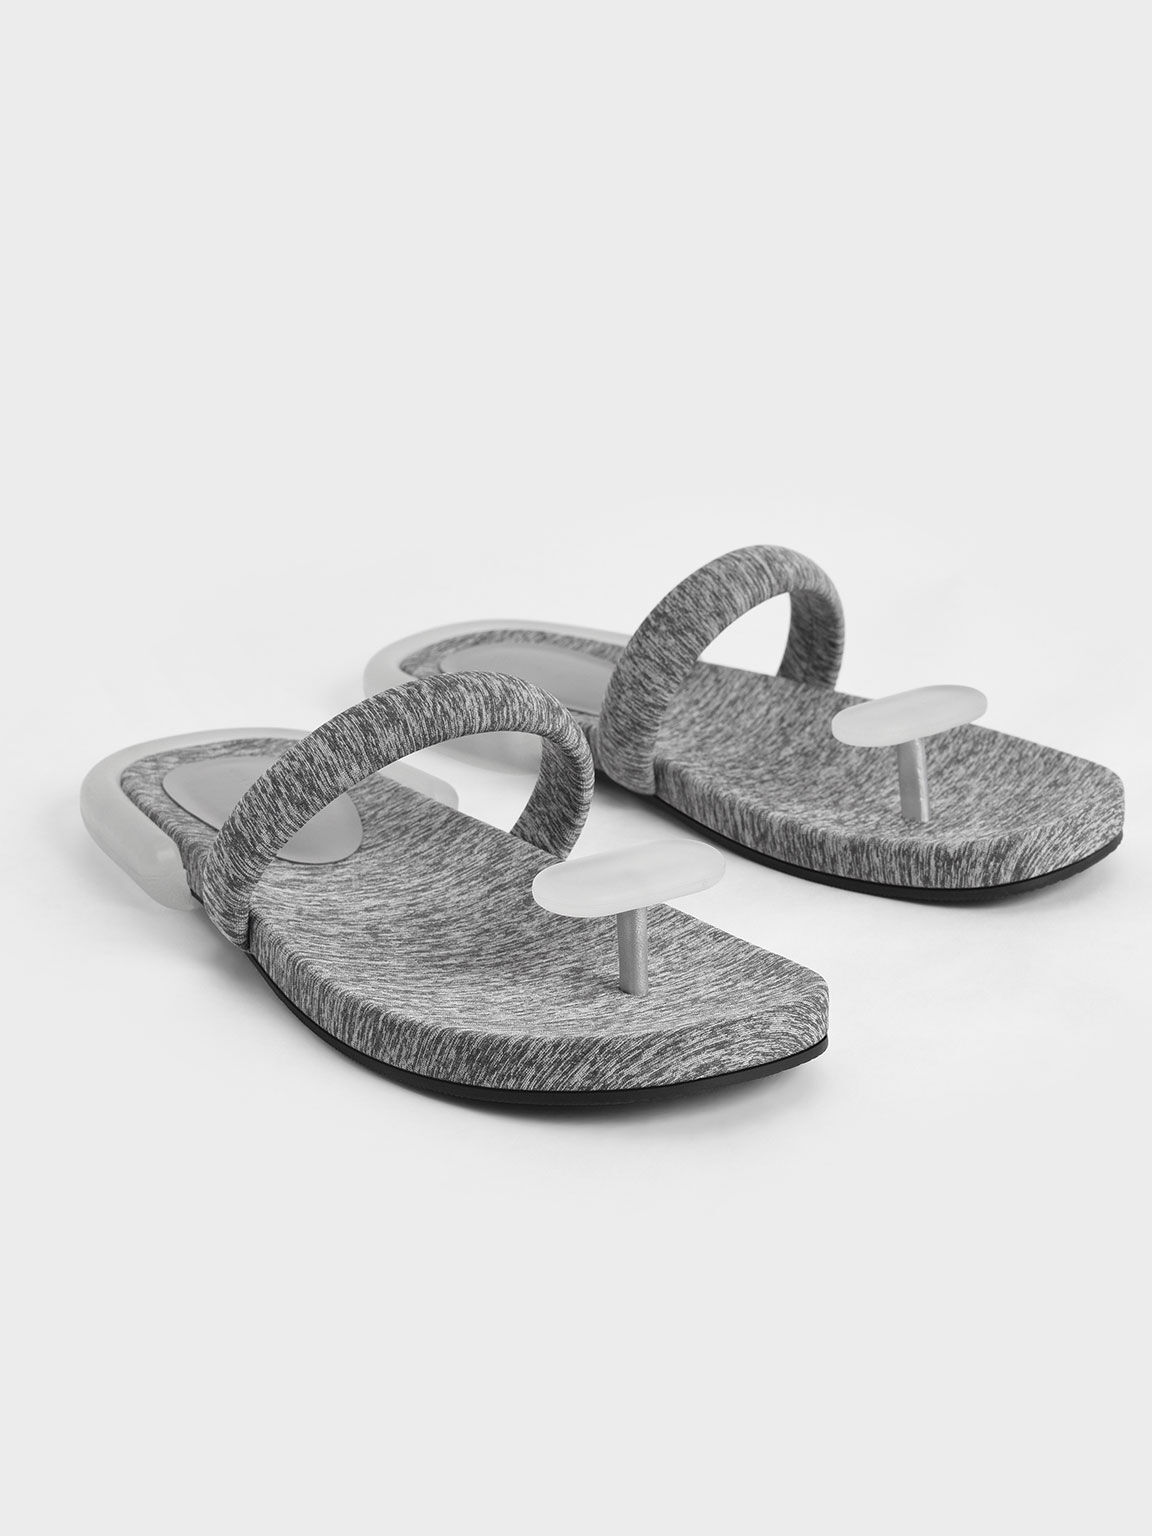 Sandal Thong Electra Recycled Polyester, Light Grey, hi-res